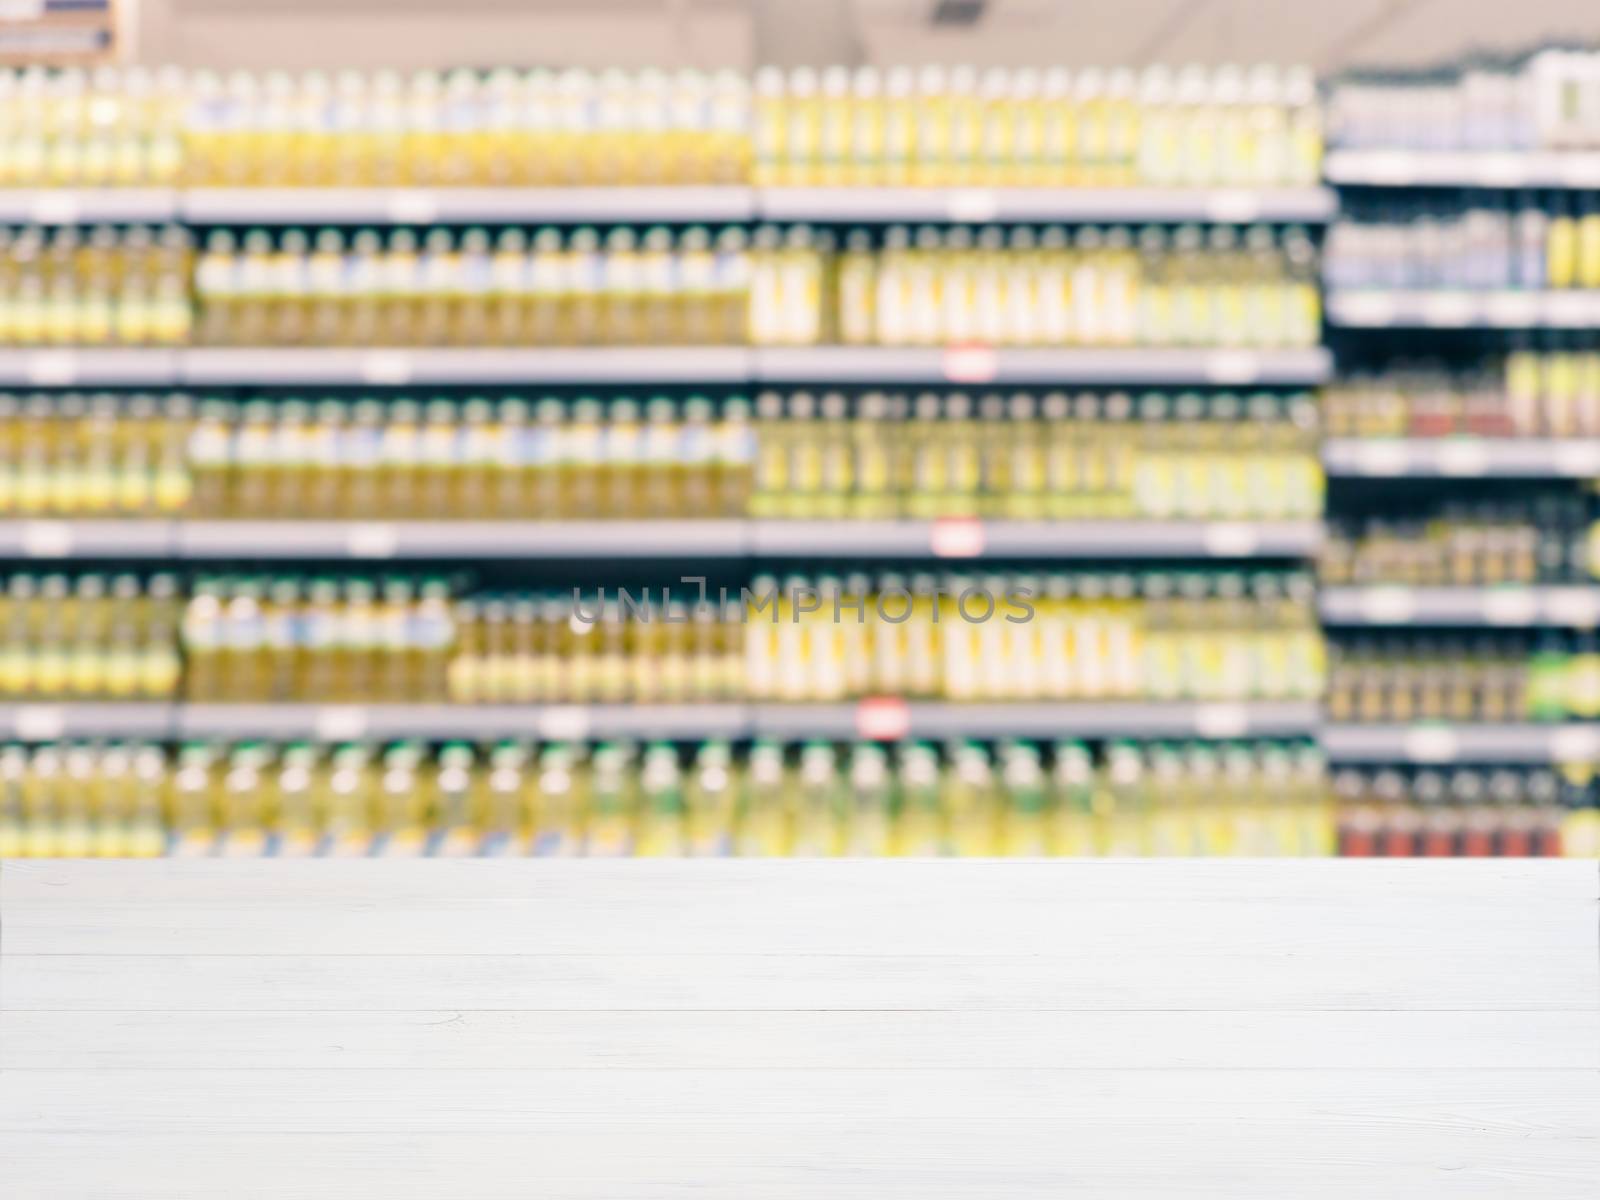  Blurred colorful supermarket products on shelves by fascinadora